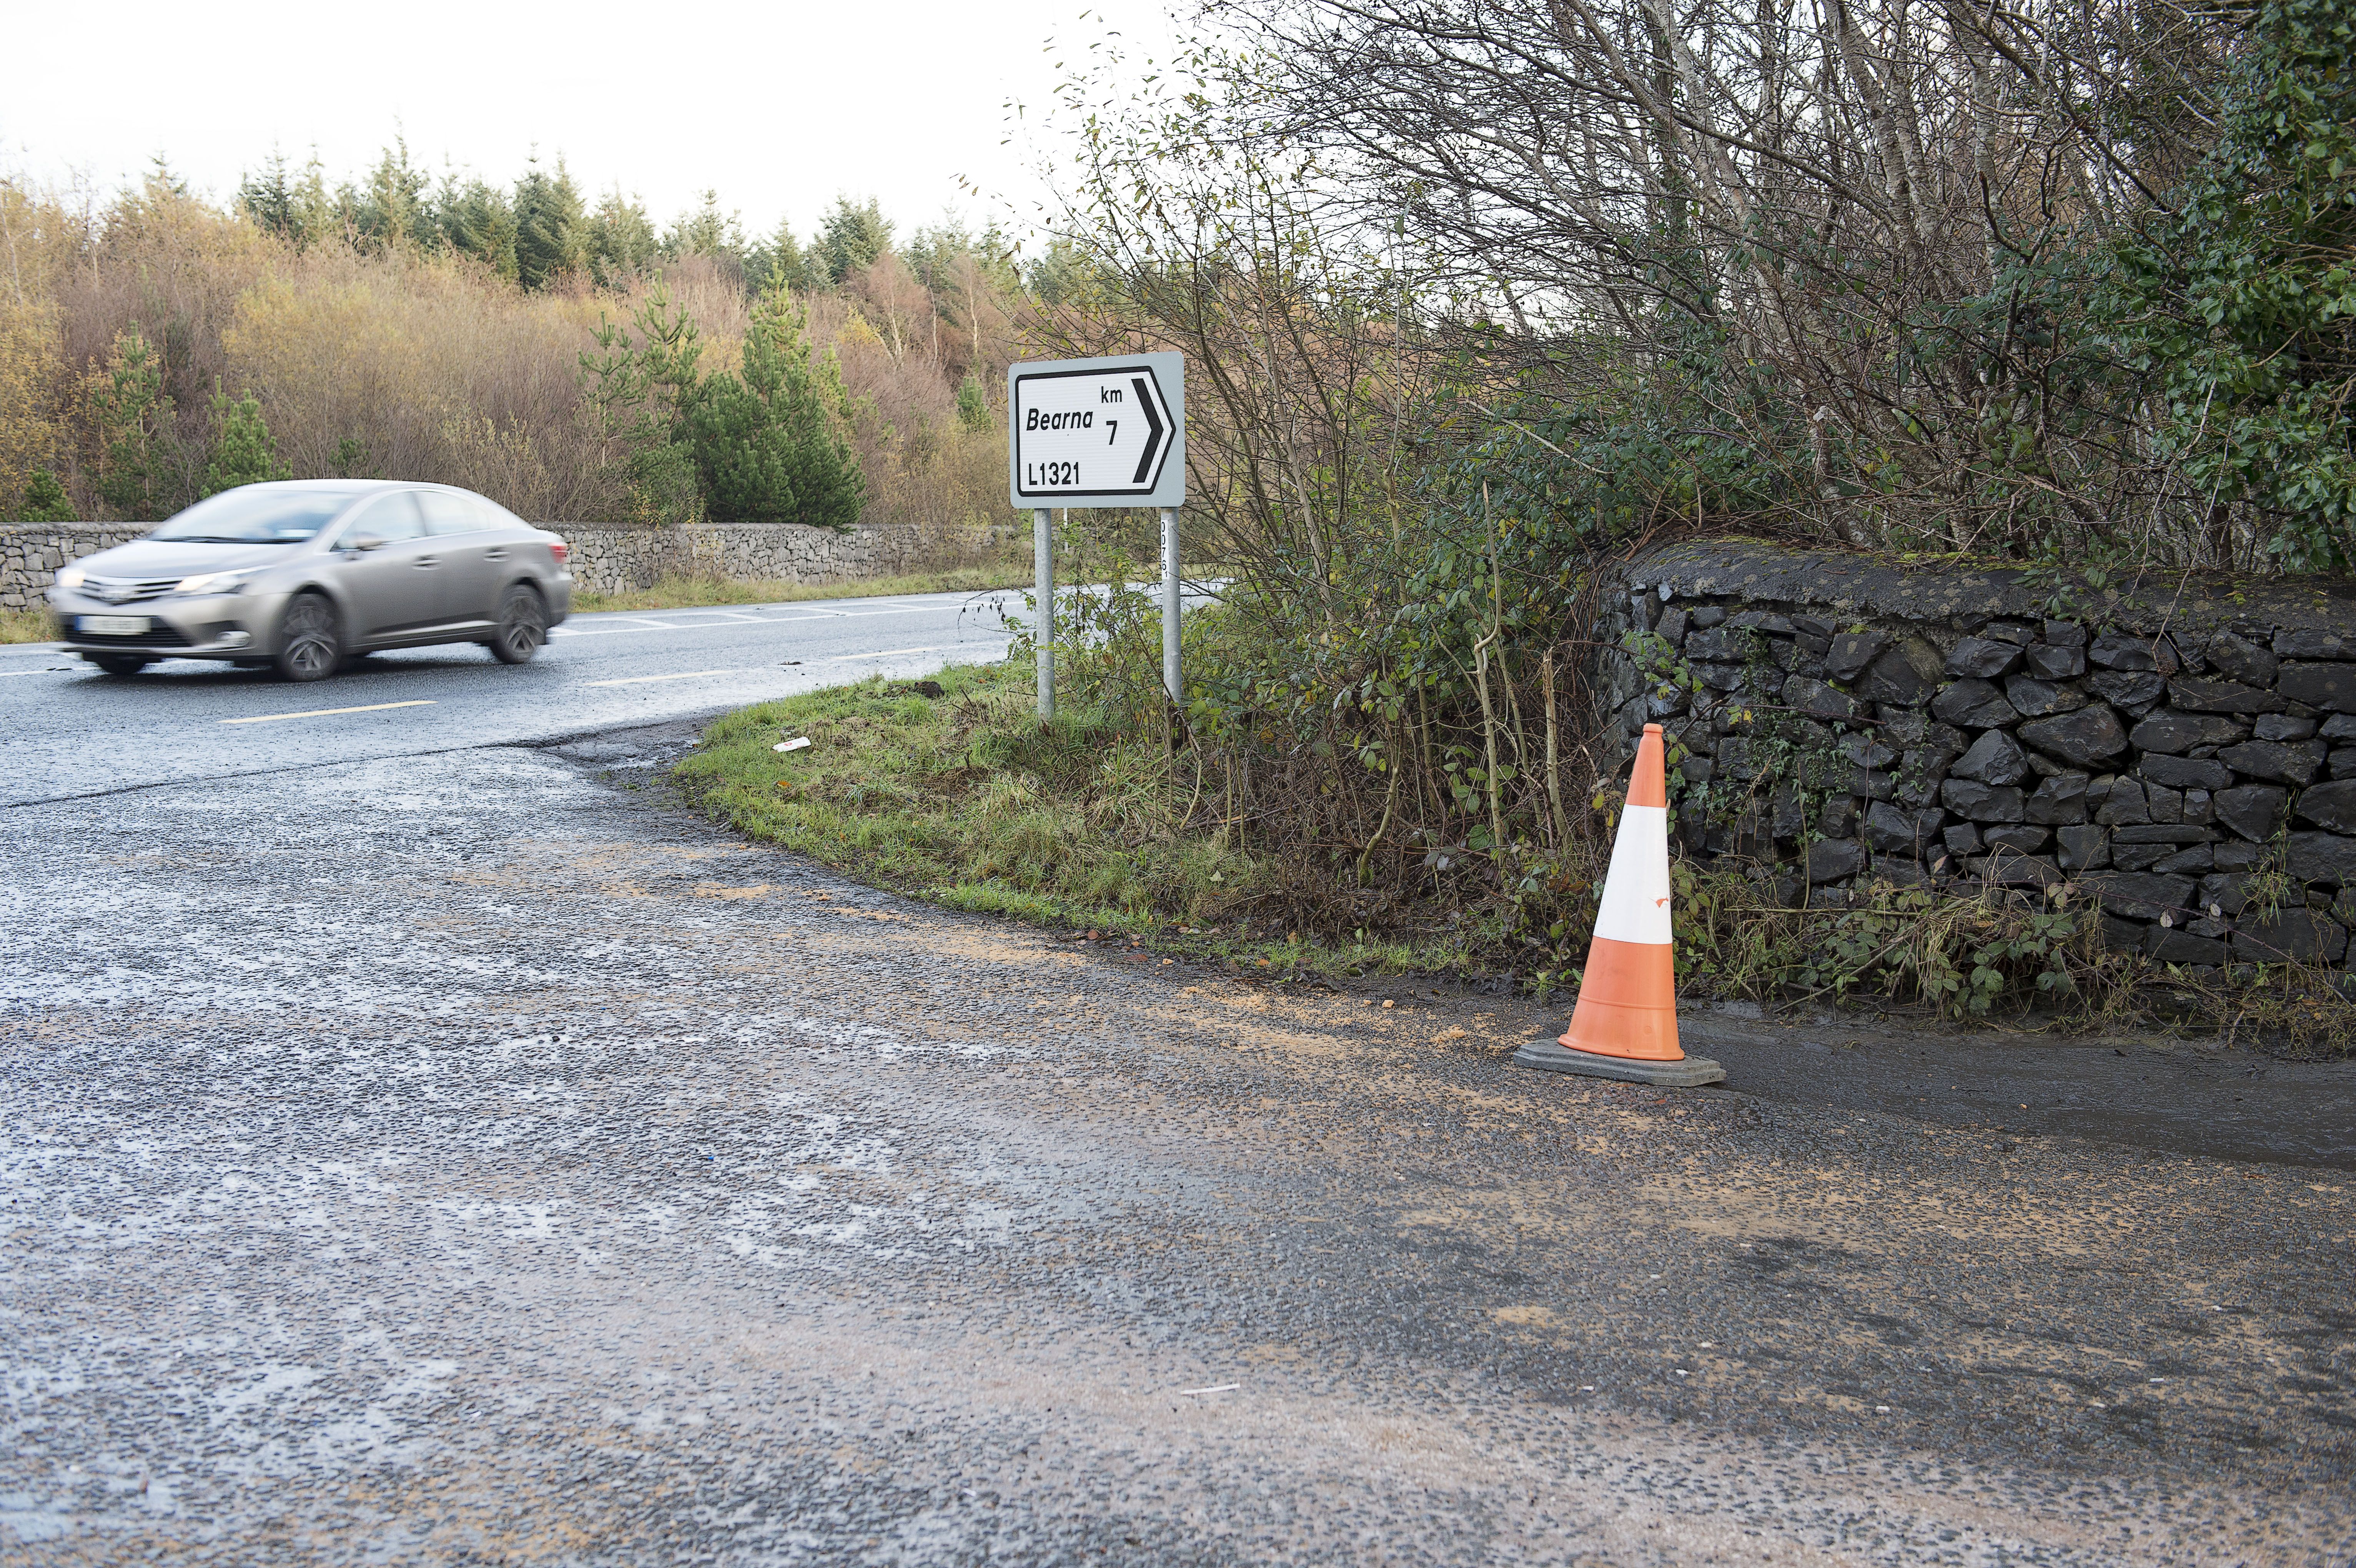 The spot at the junction of the Moycullen-Barna road where a young woman fell from a moving van and was killed in November of last year. Photo: Andrew Downes, xposure.